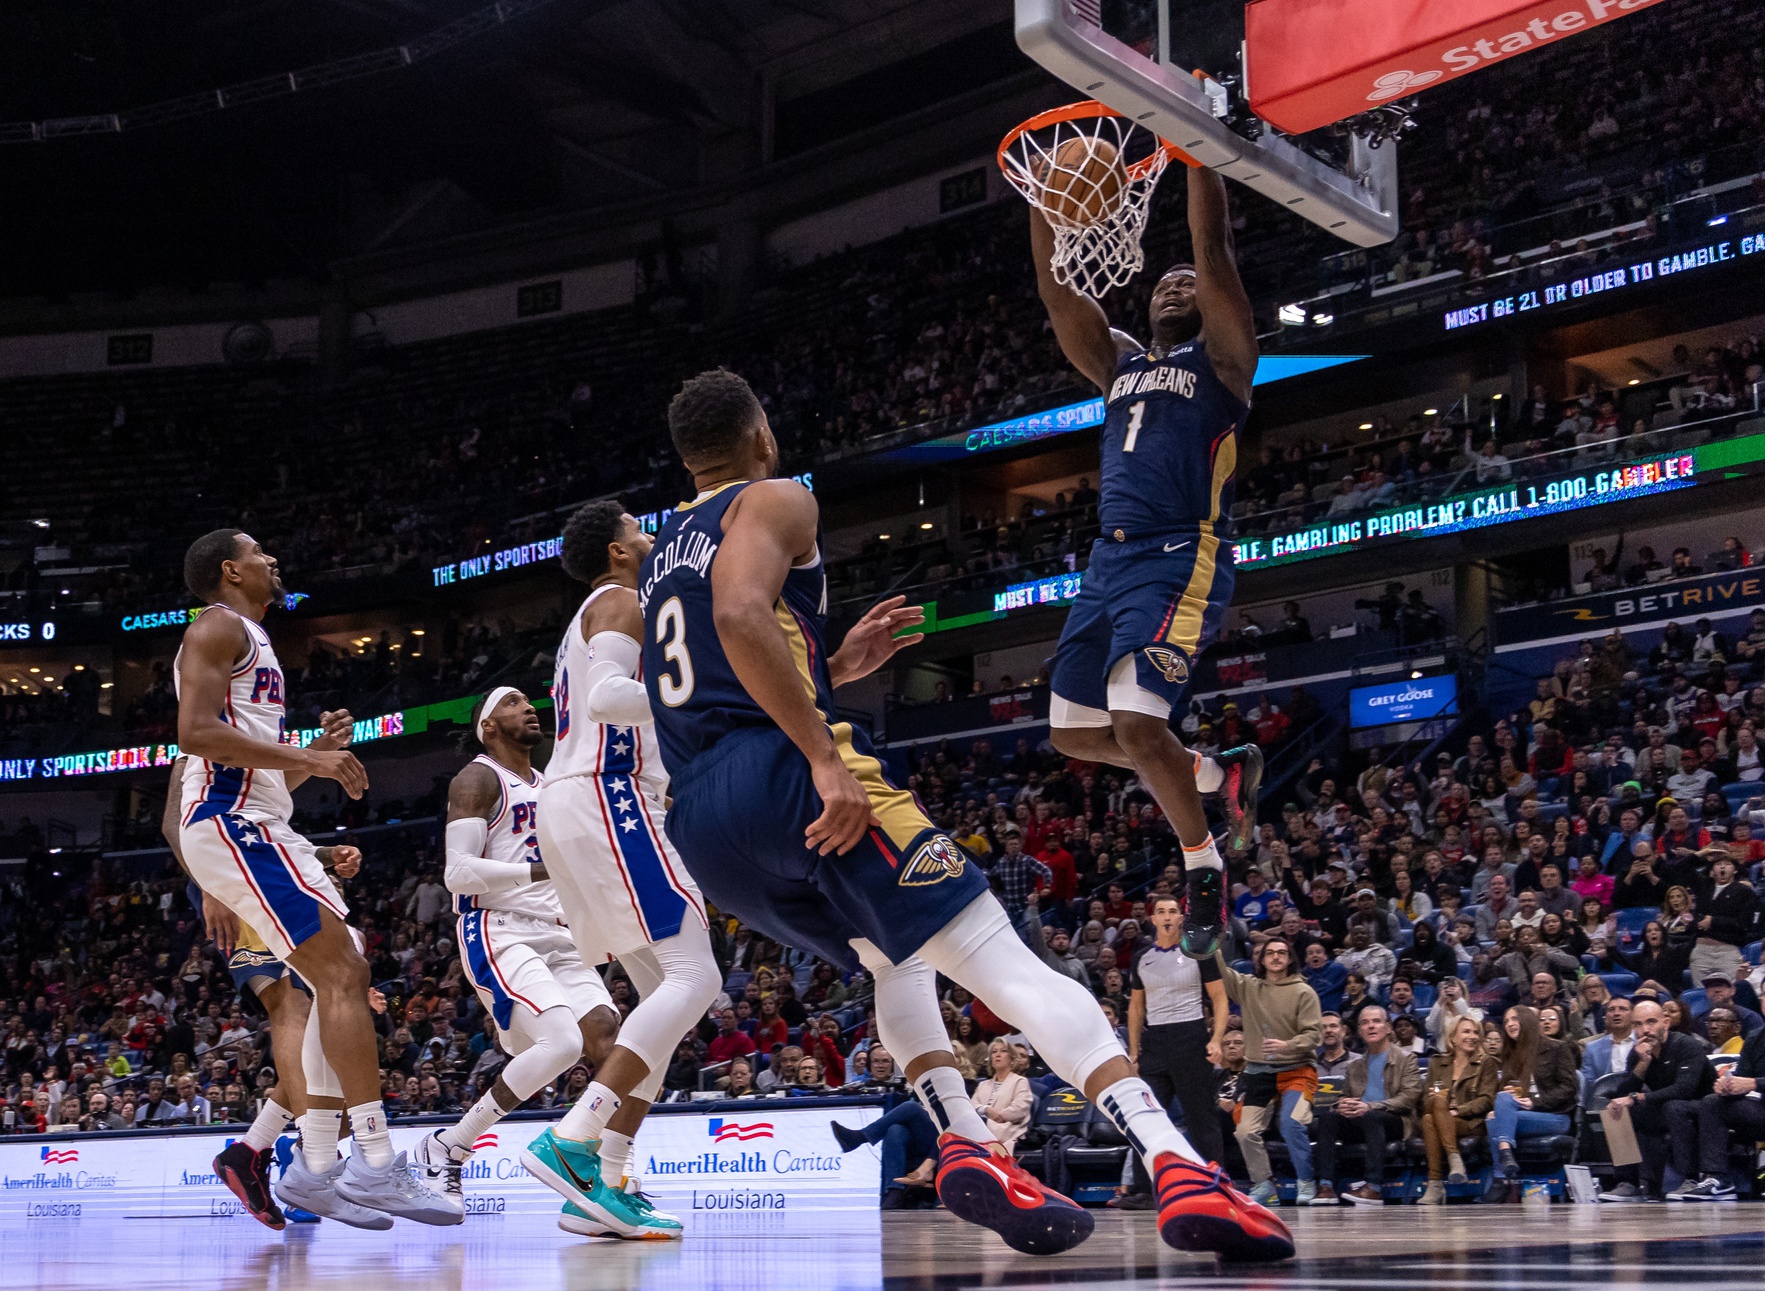 New Orleans Pelicans guard CJ McCollum (3) throws an alley-oop pass to forward Zion Williamson (1) for the dunk against Philadelphia 76ers forward Tobias Harris (12) during the second half at the Smoothie King Center.